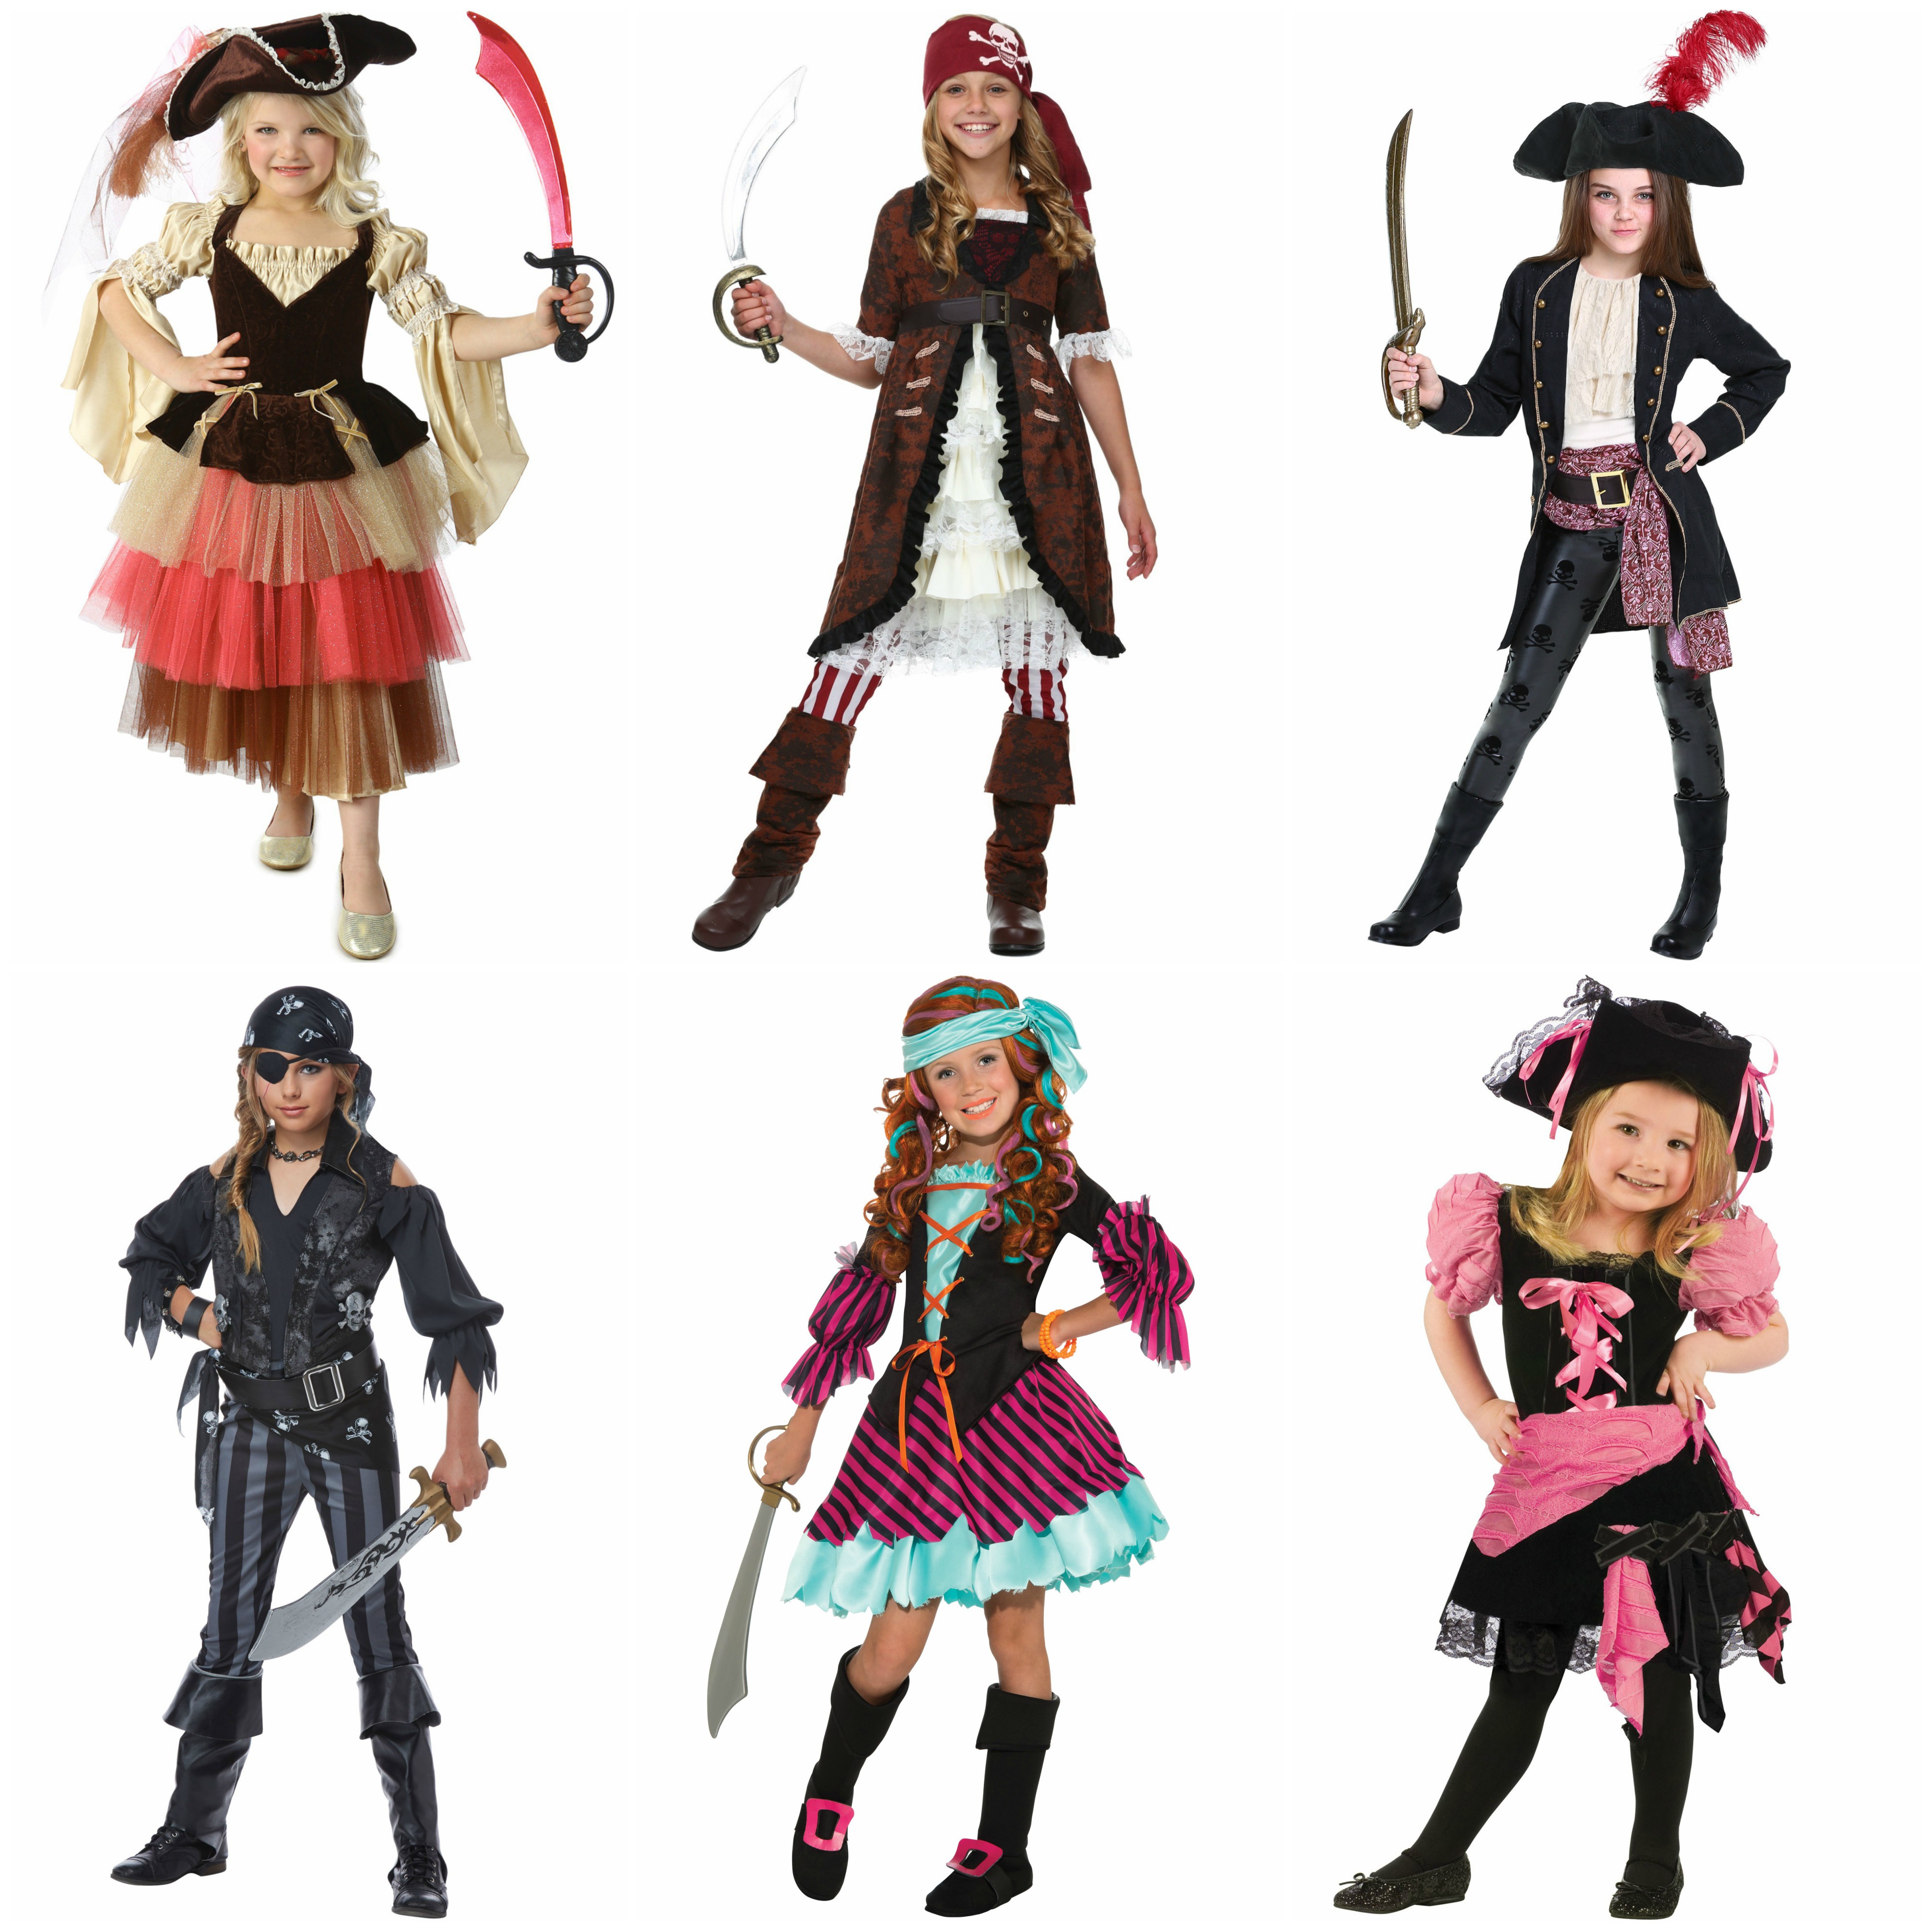 Pirate costumes for girls